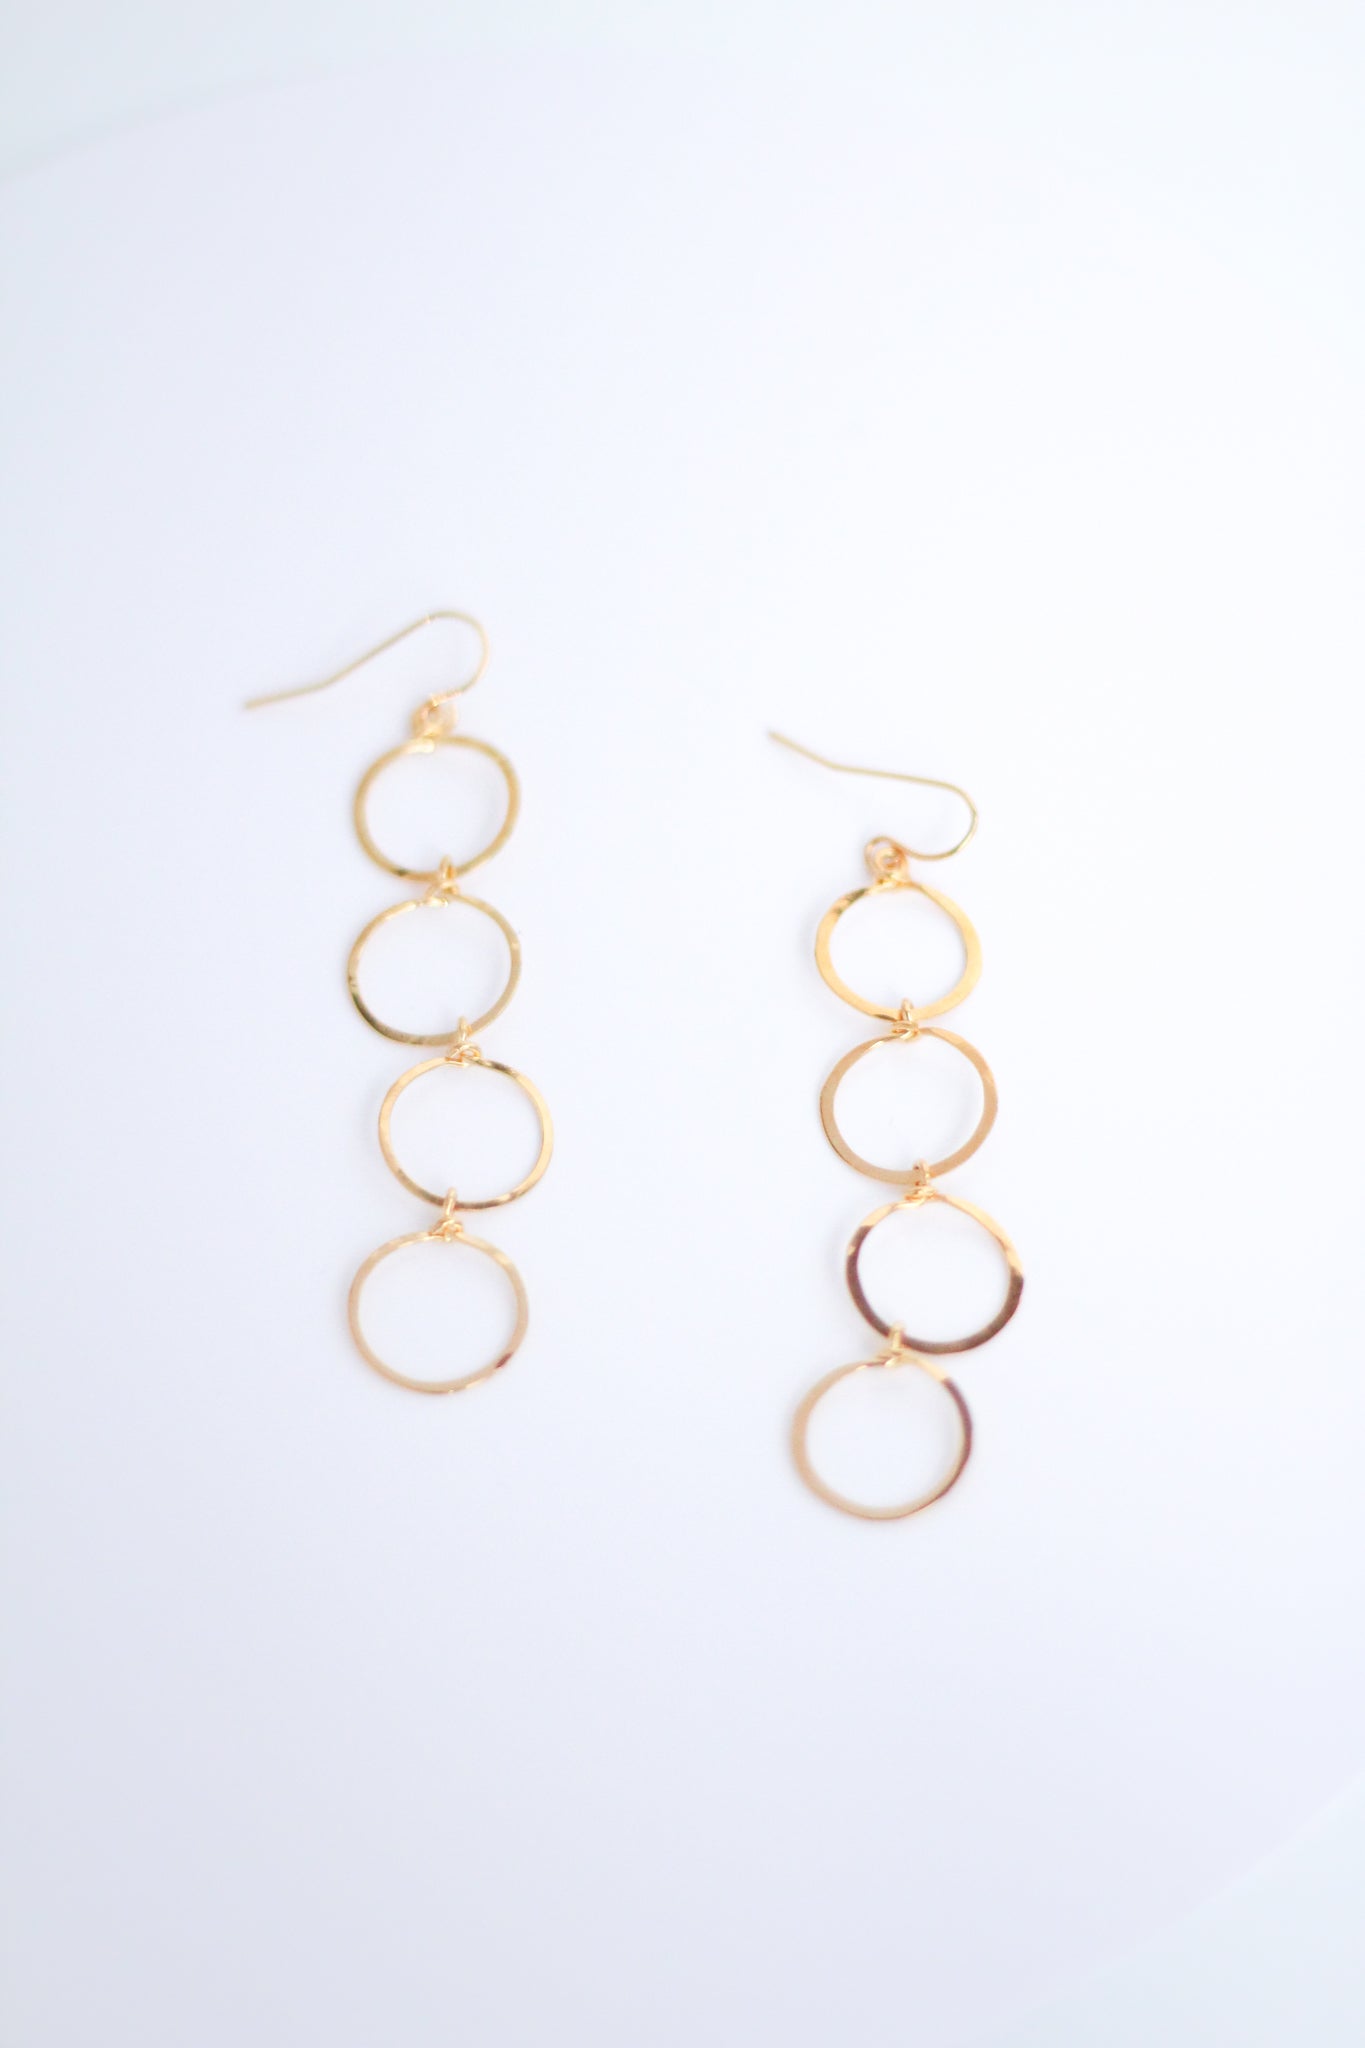 Hammered Small Circle Drop Earrings.